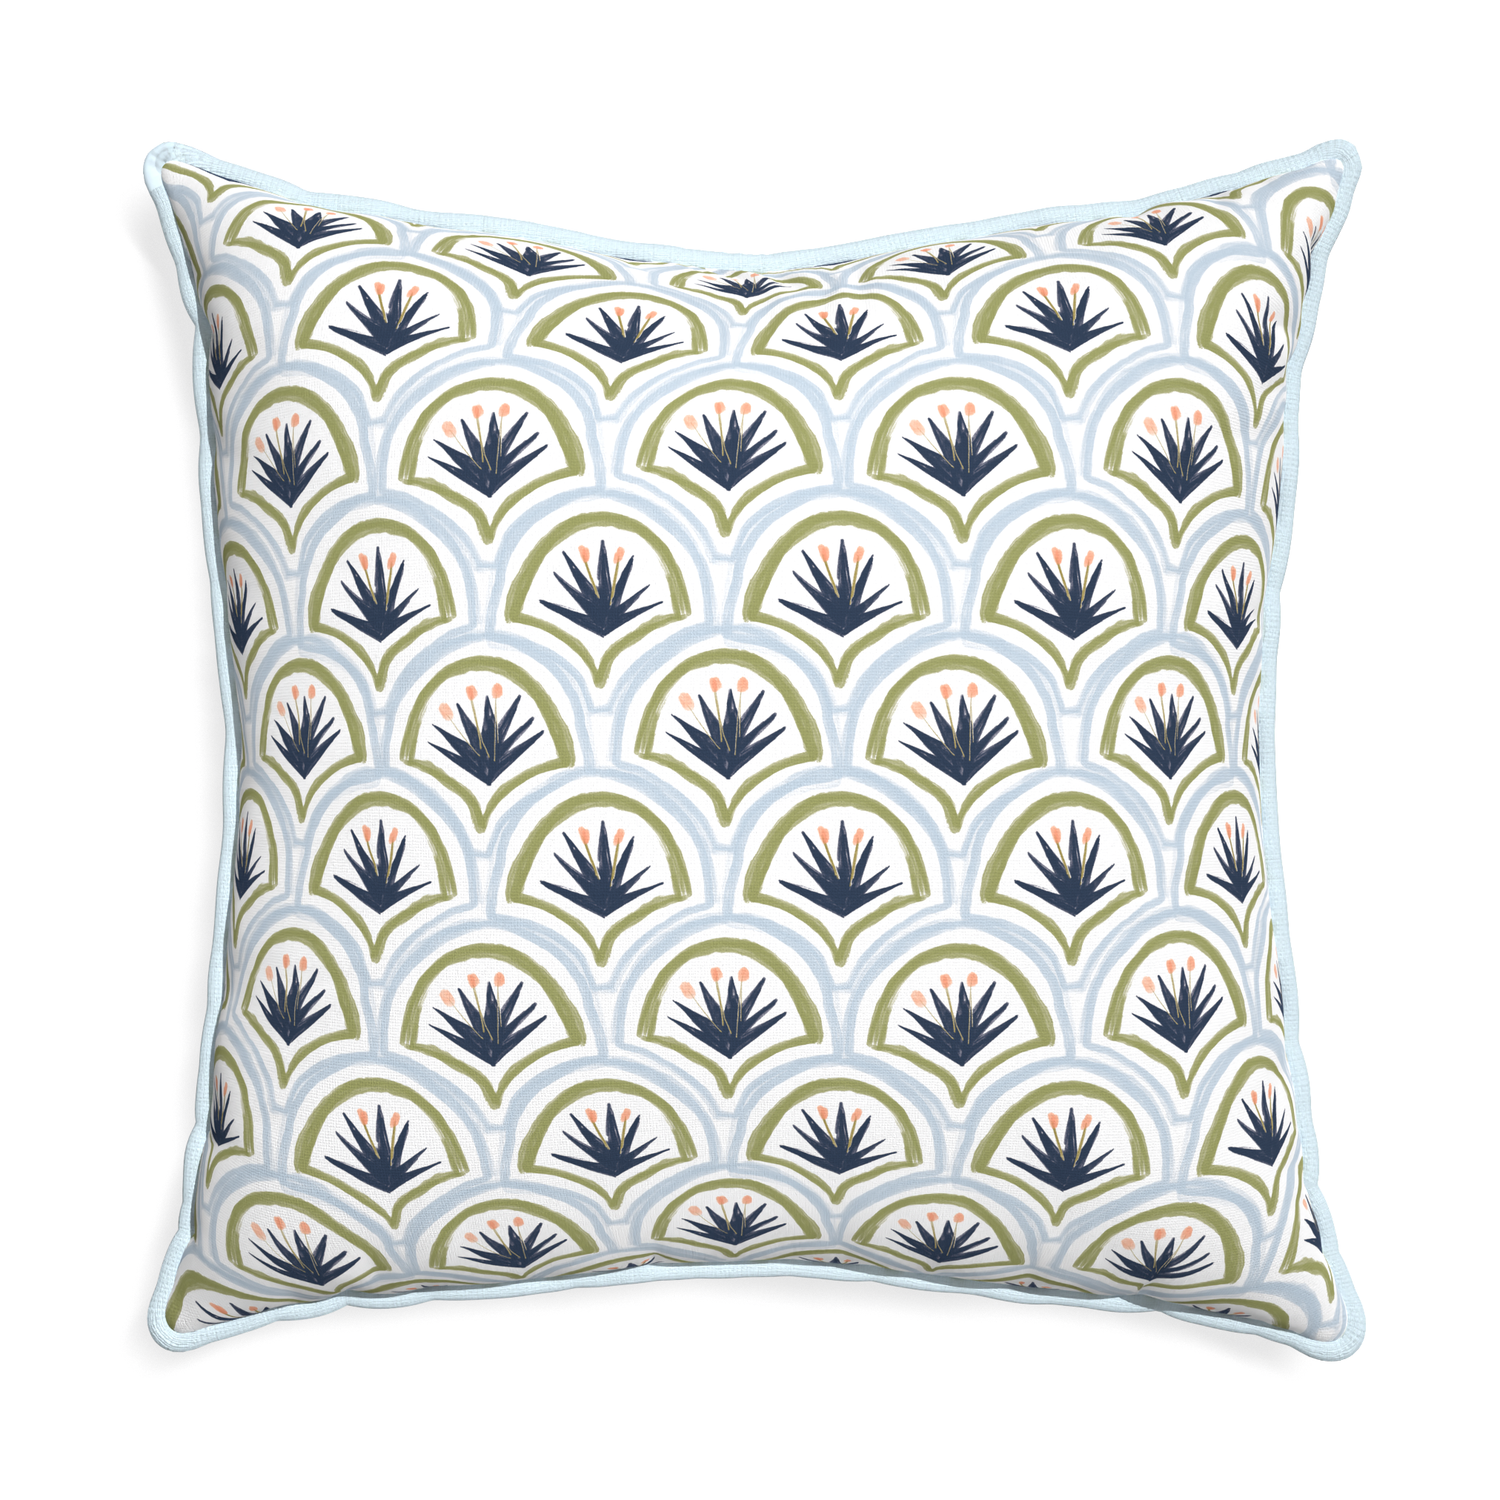 Euro-sham thatcher midnight custom art deco palm patternpillow with powder piping on white background